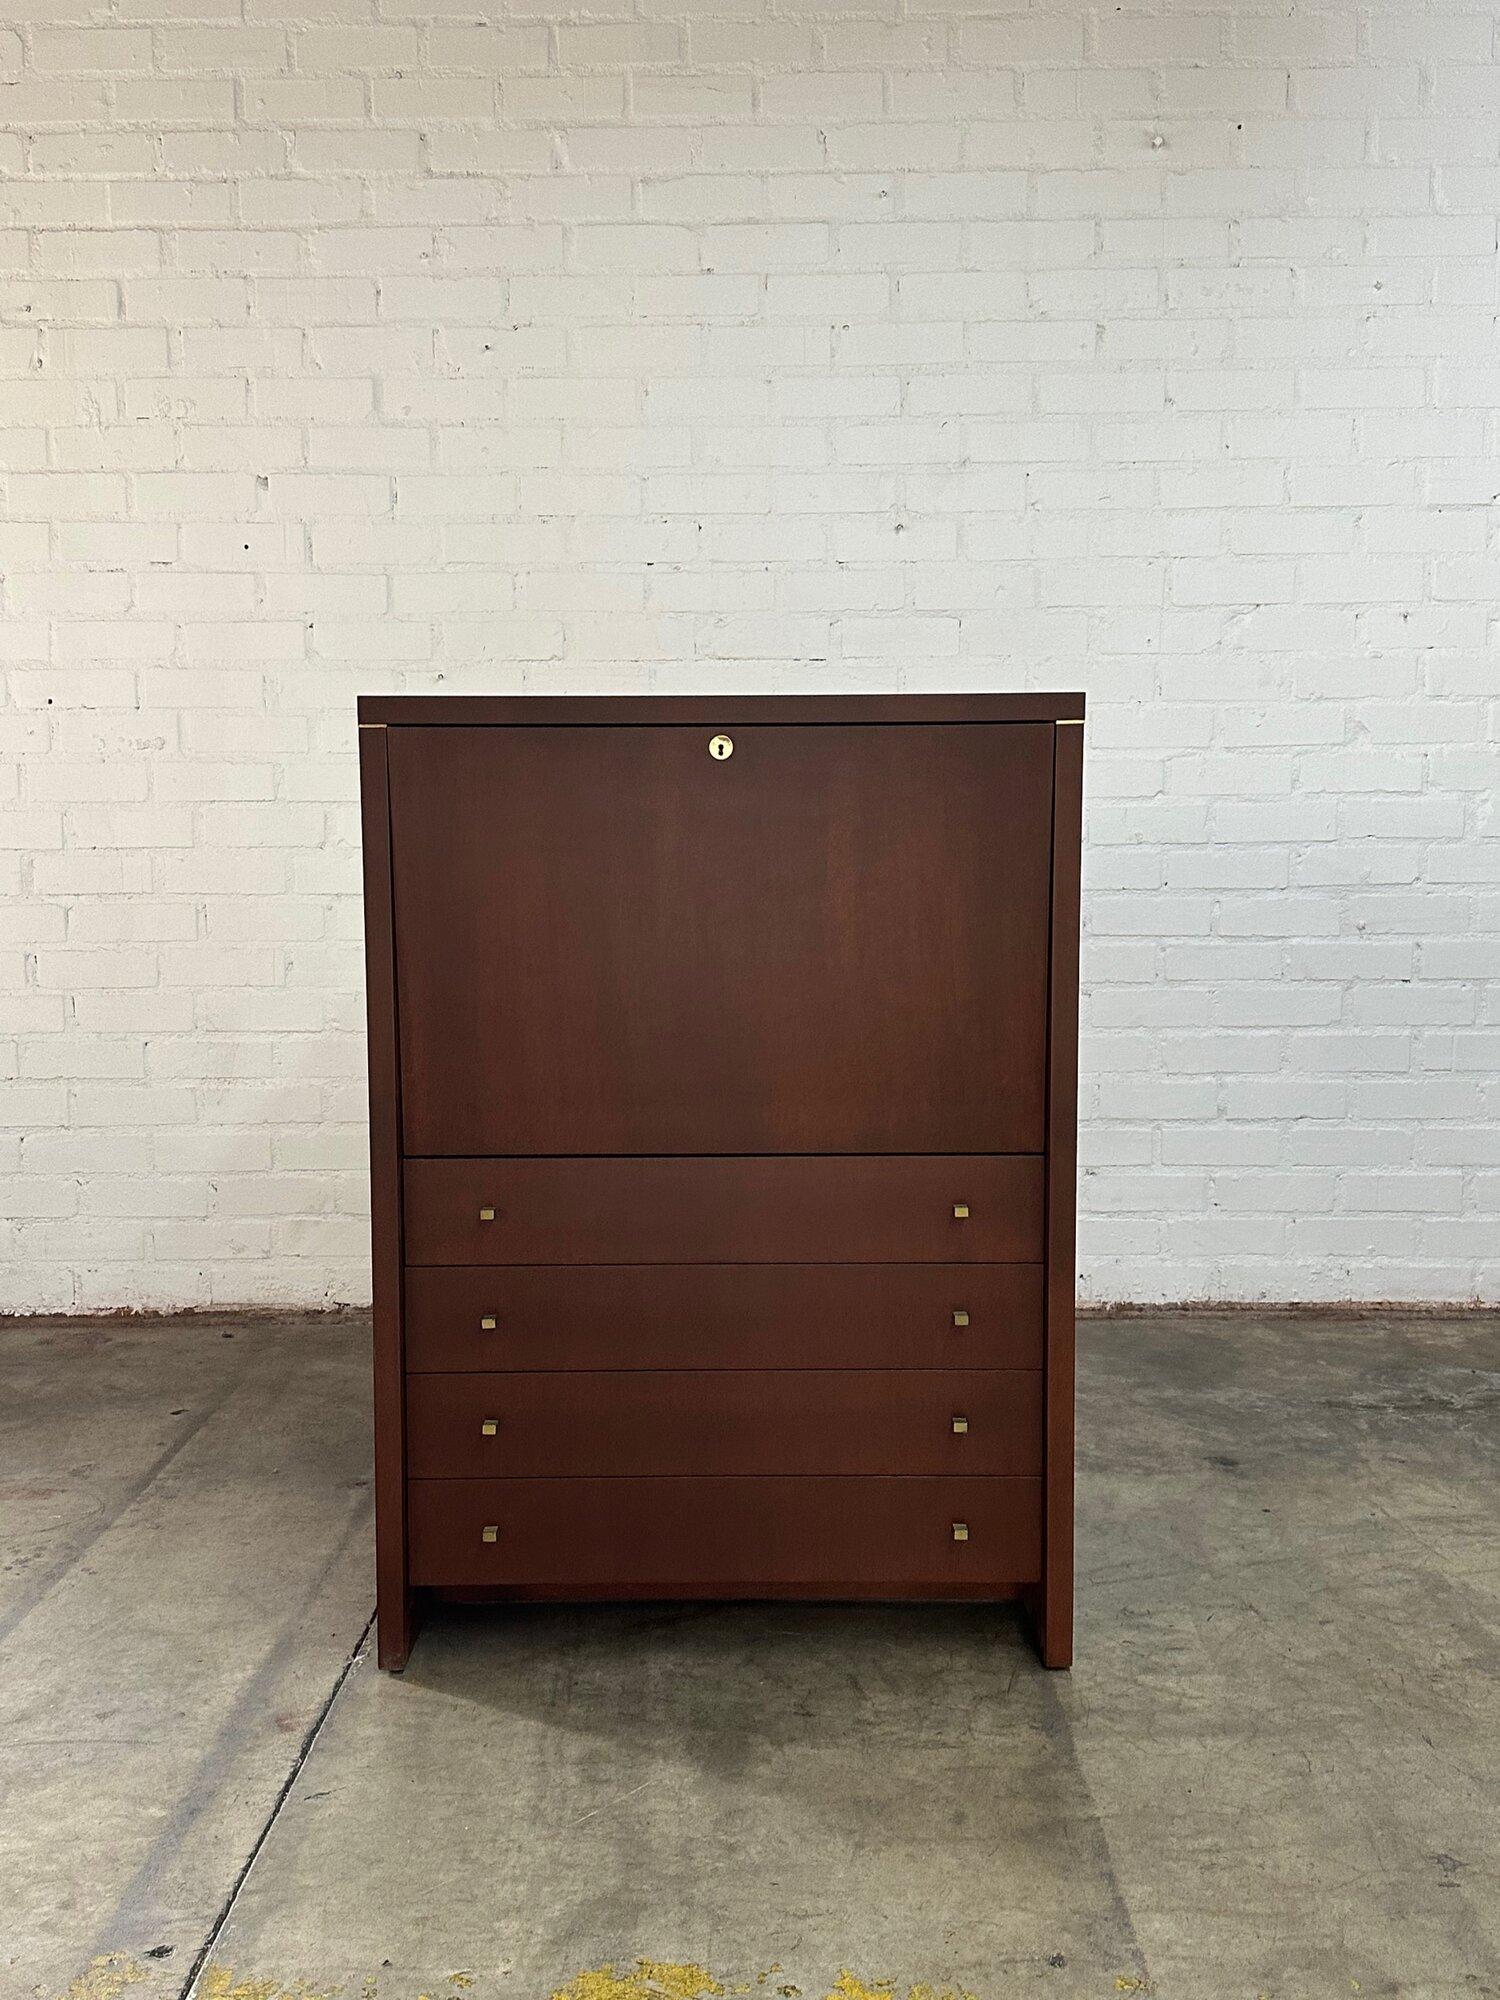 W35.5 D17.5 H49.5 KC25

Vintage 1980s drop down desk in a dark walnut finish. Item features brass inlay joinery, original textured hardware and comes with original key. Item shows in good restored condition. Desk is structurally sound and fully